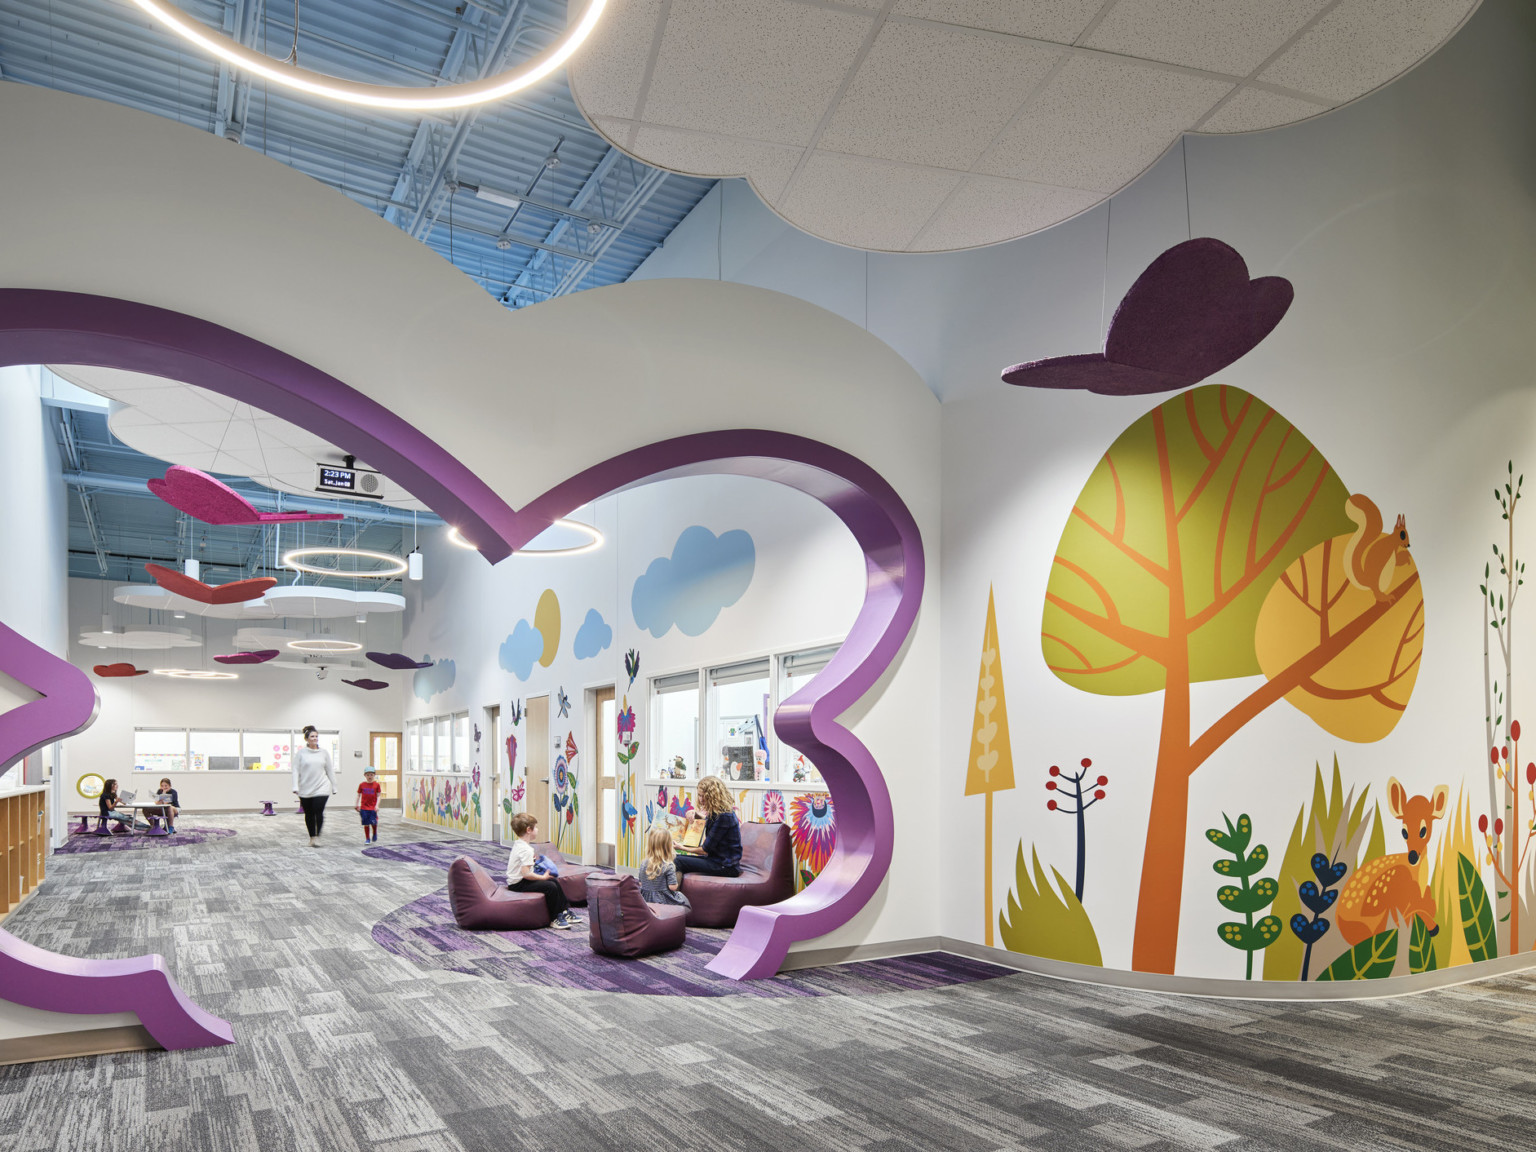 North Kansas City Early Education Center interior hallway with bright mural of trees and abstract shaped cutout in hall